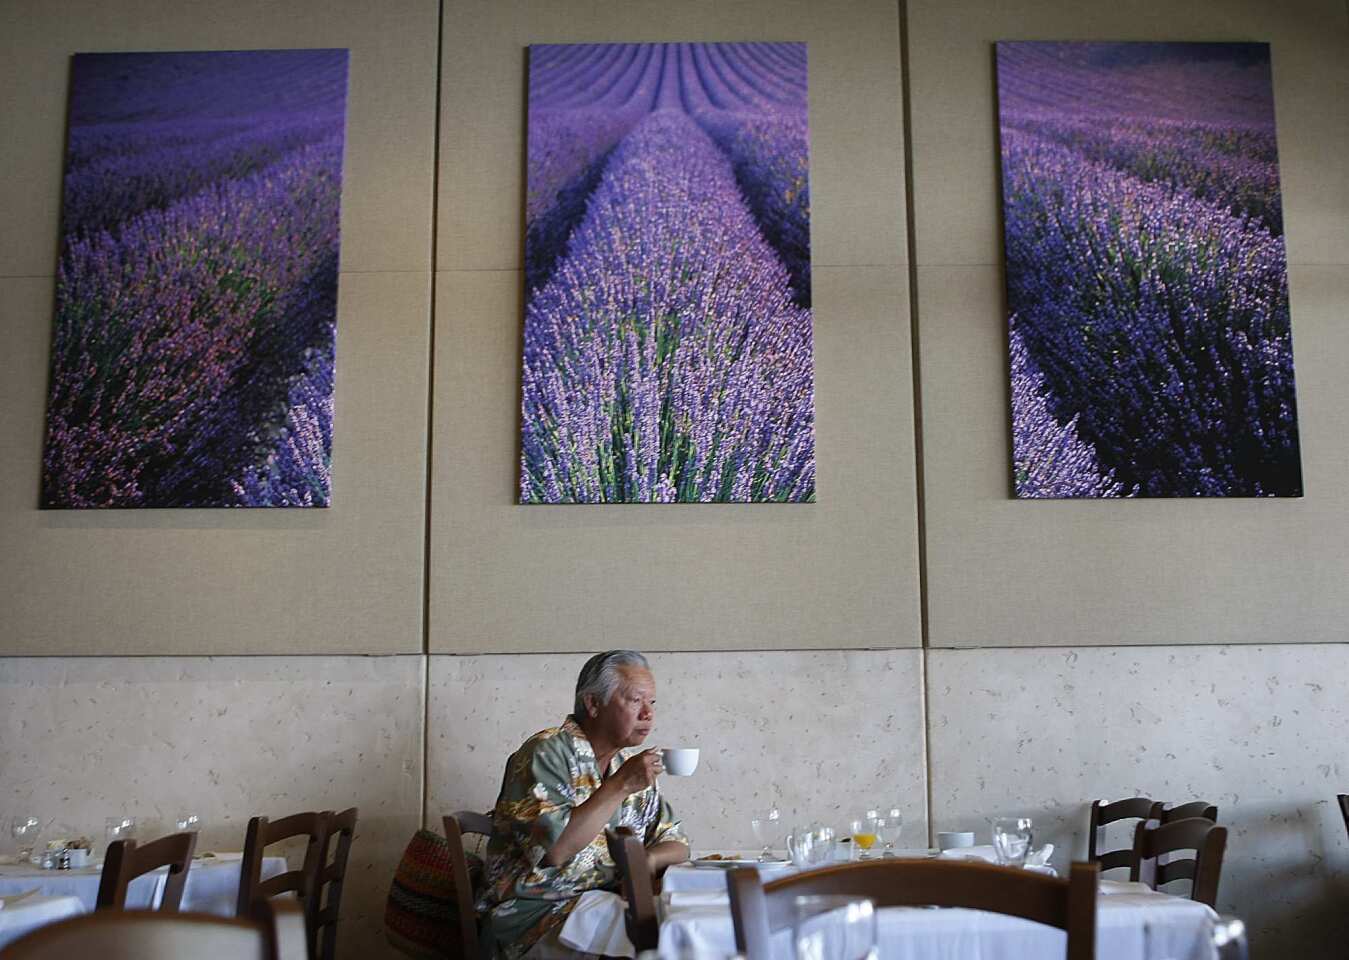 Pacific Palisades resident Ernie Wong sips a coffee during Sunday brunch at Maison Giraud.